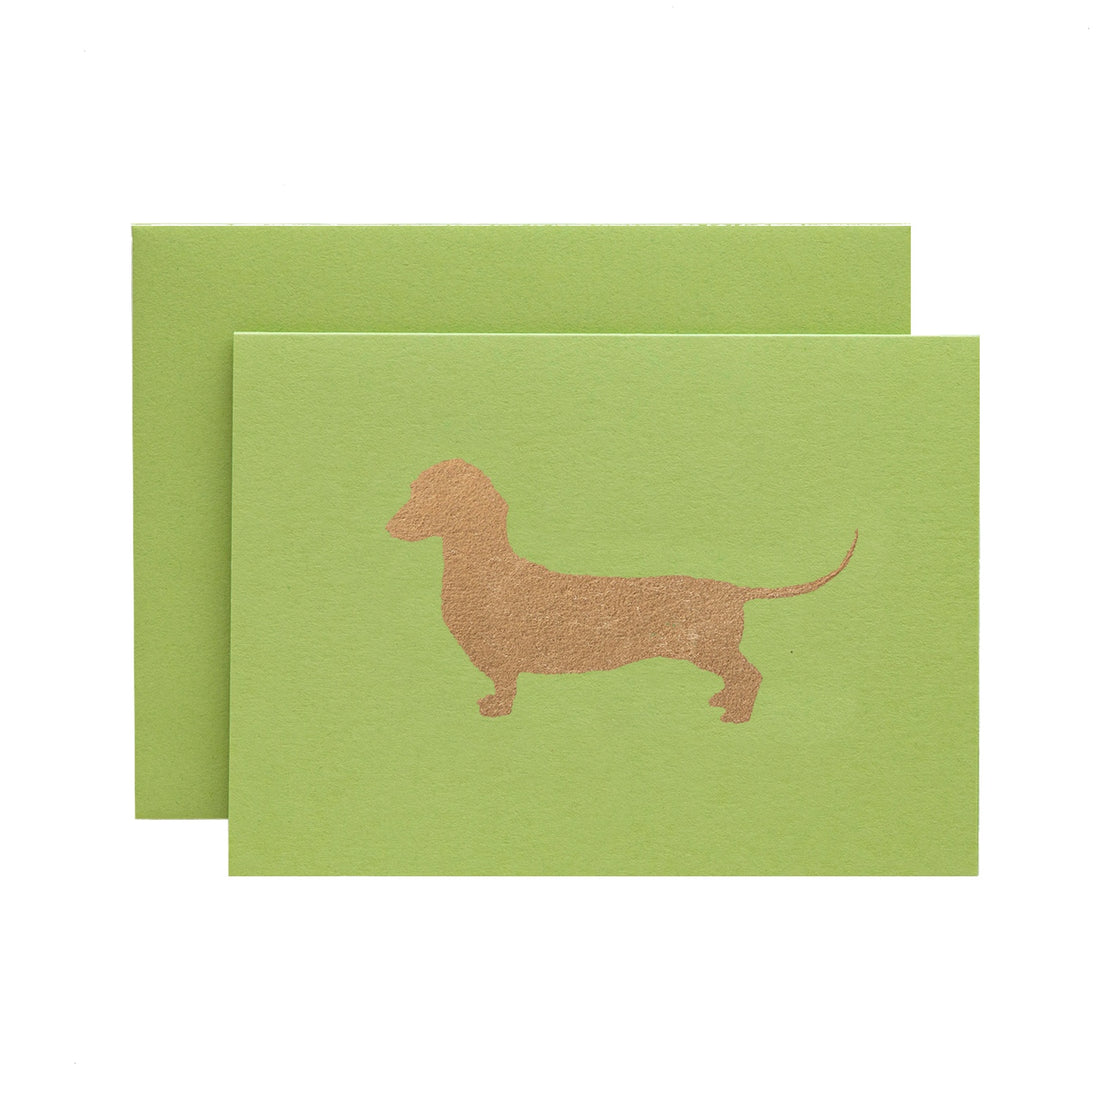 A lime green card featuring the silhouette of a dachshund in solid gold leaf.